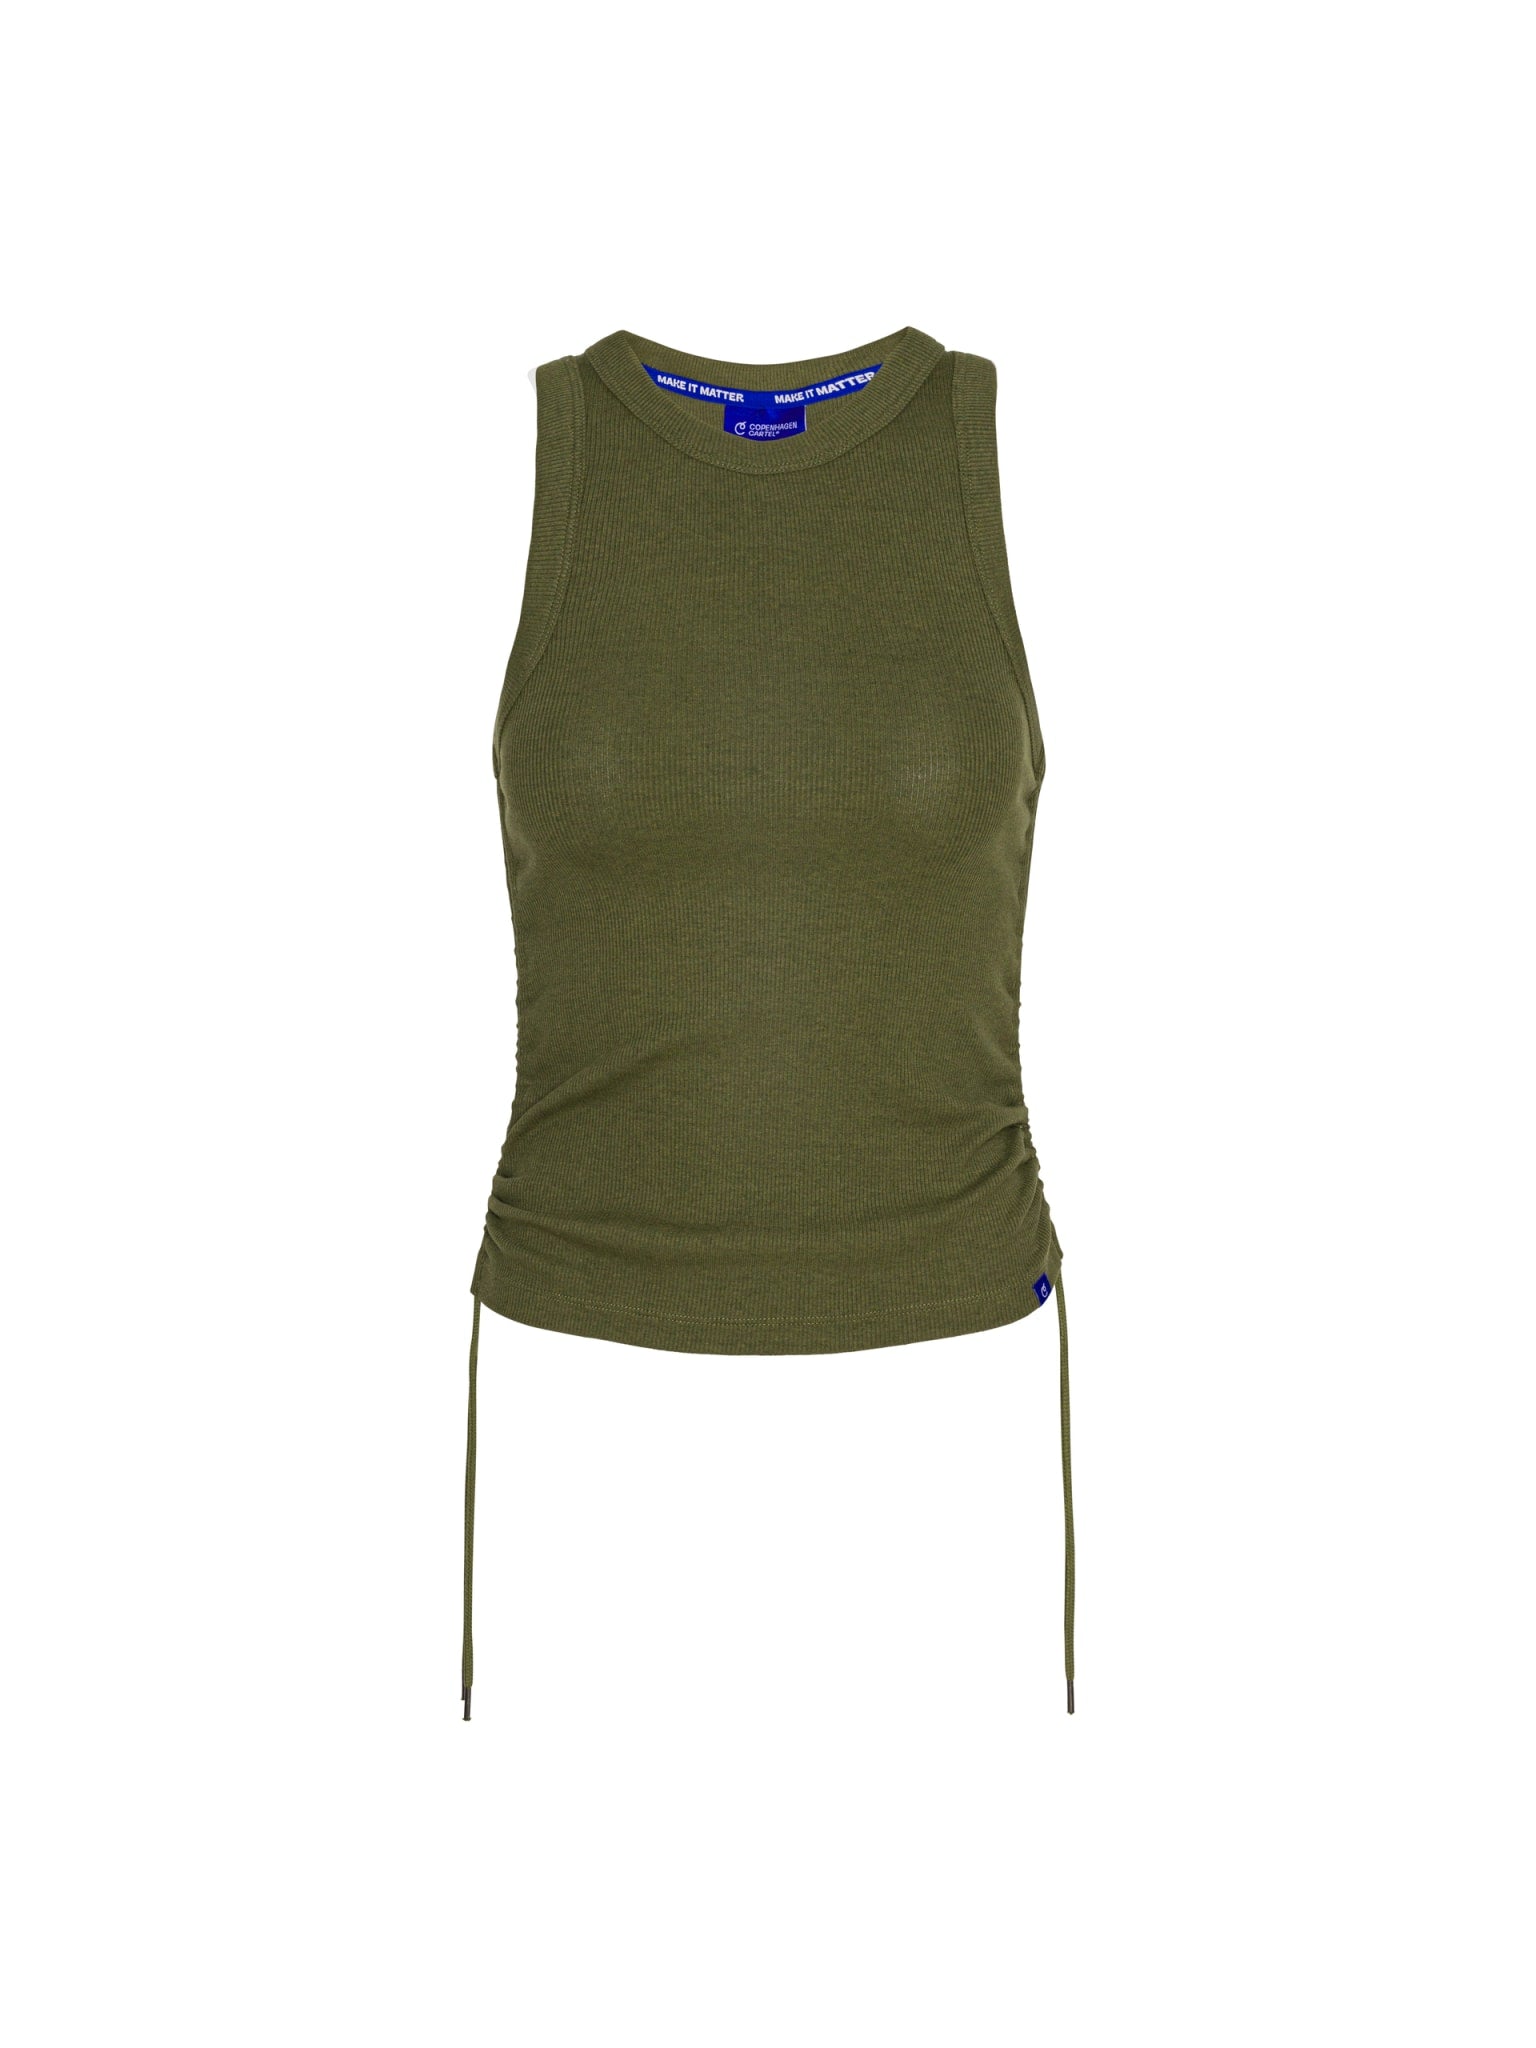 Shore ribbed adjustable OCN Weed® top - Army